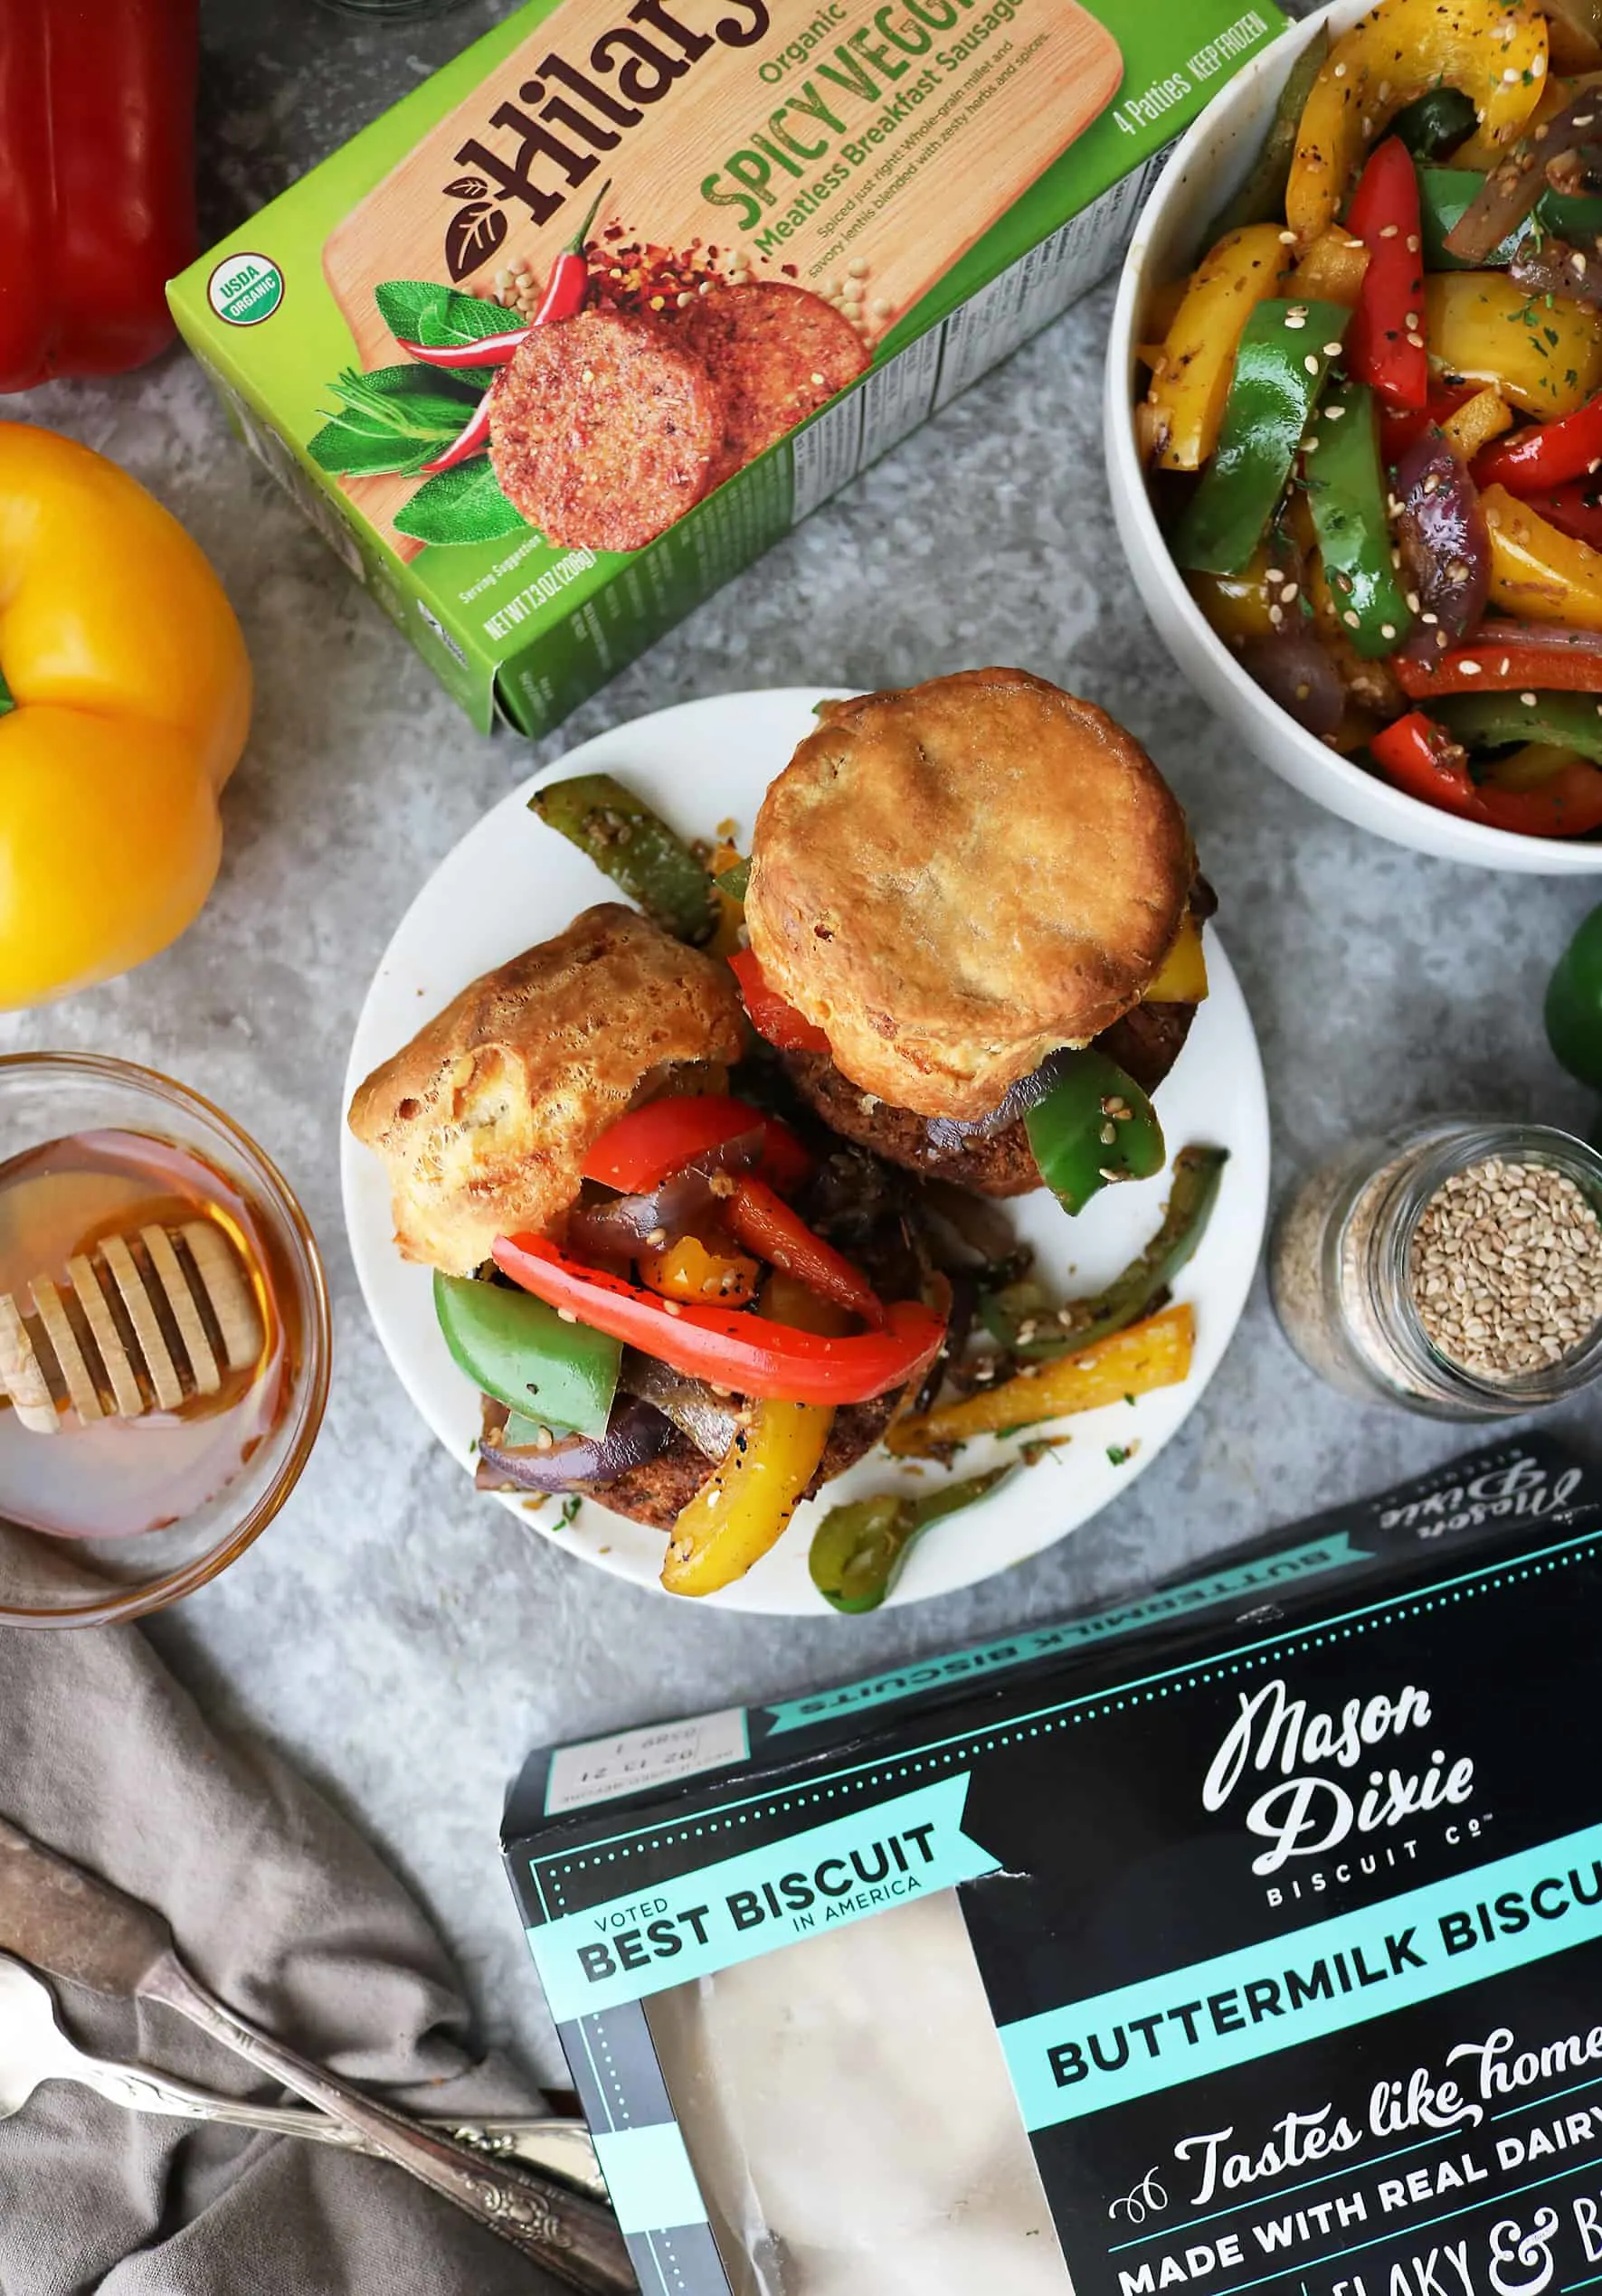 15 Minute Honey Ginger Sesame Veggie Sausage Biscuits. - breakfast for dinner anyone?